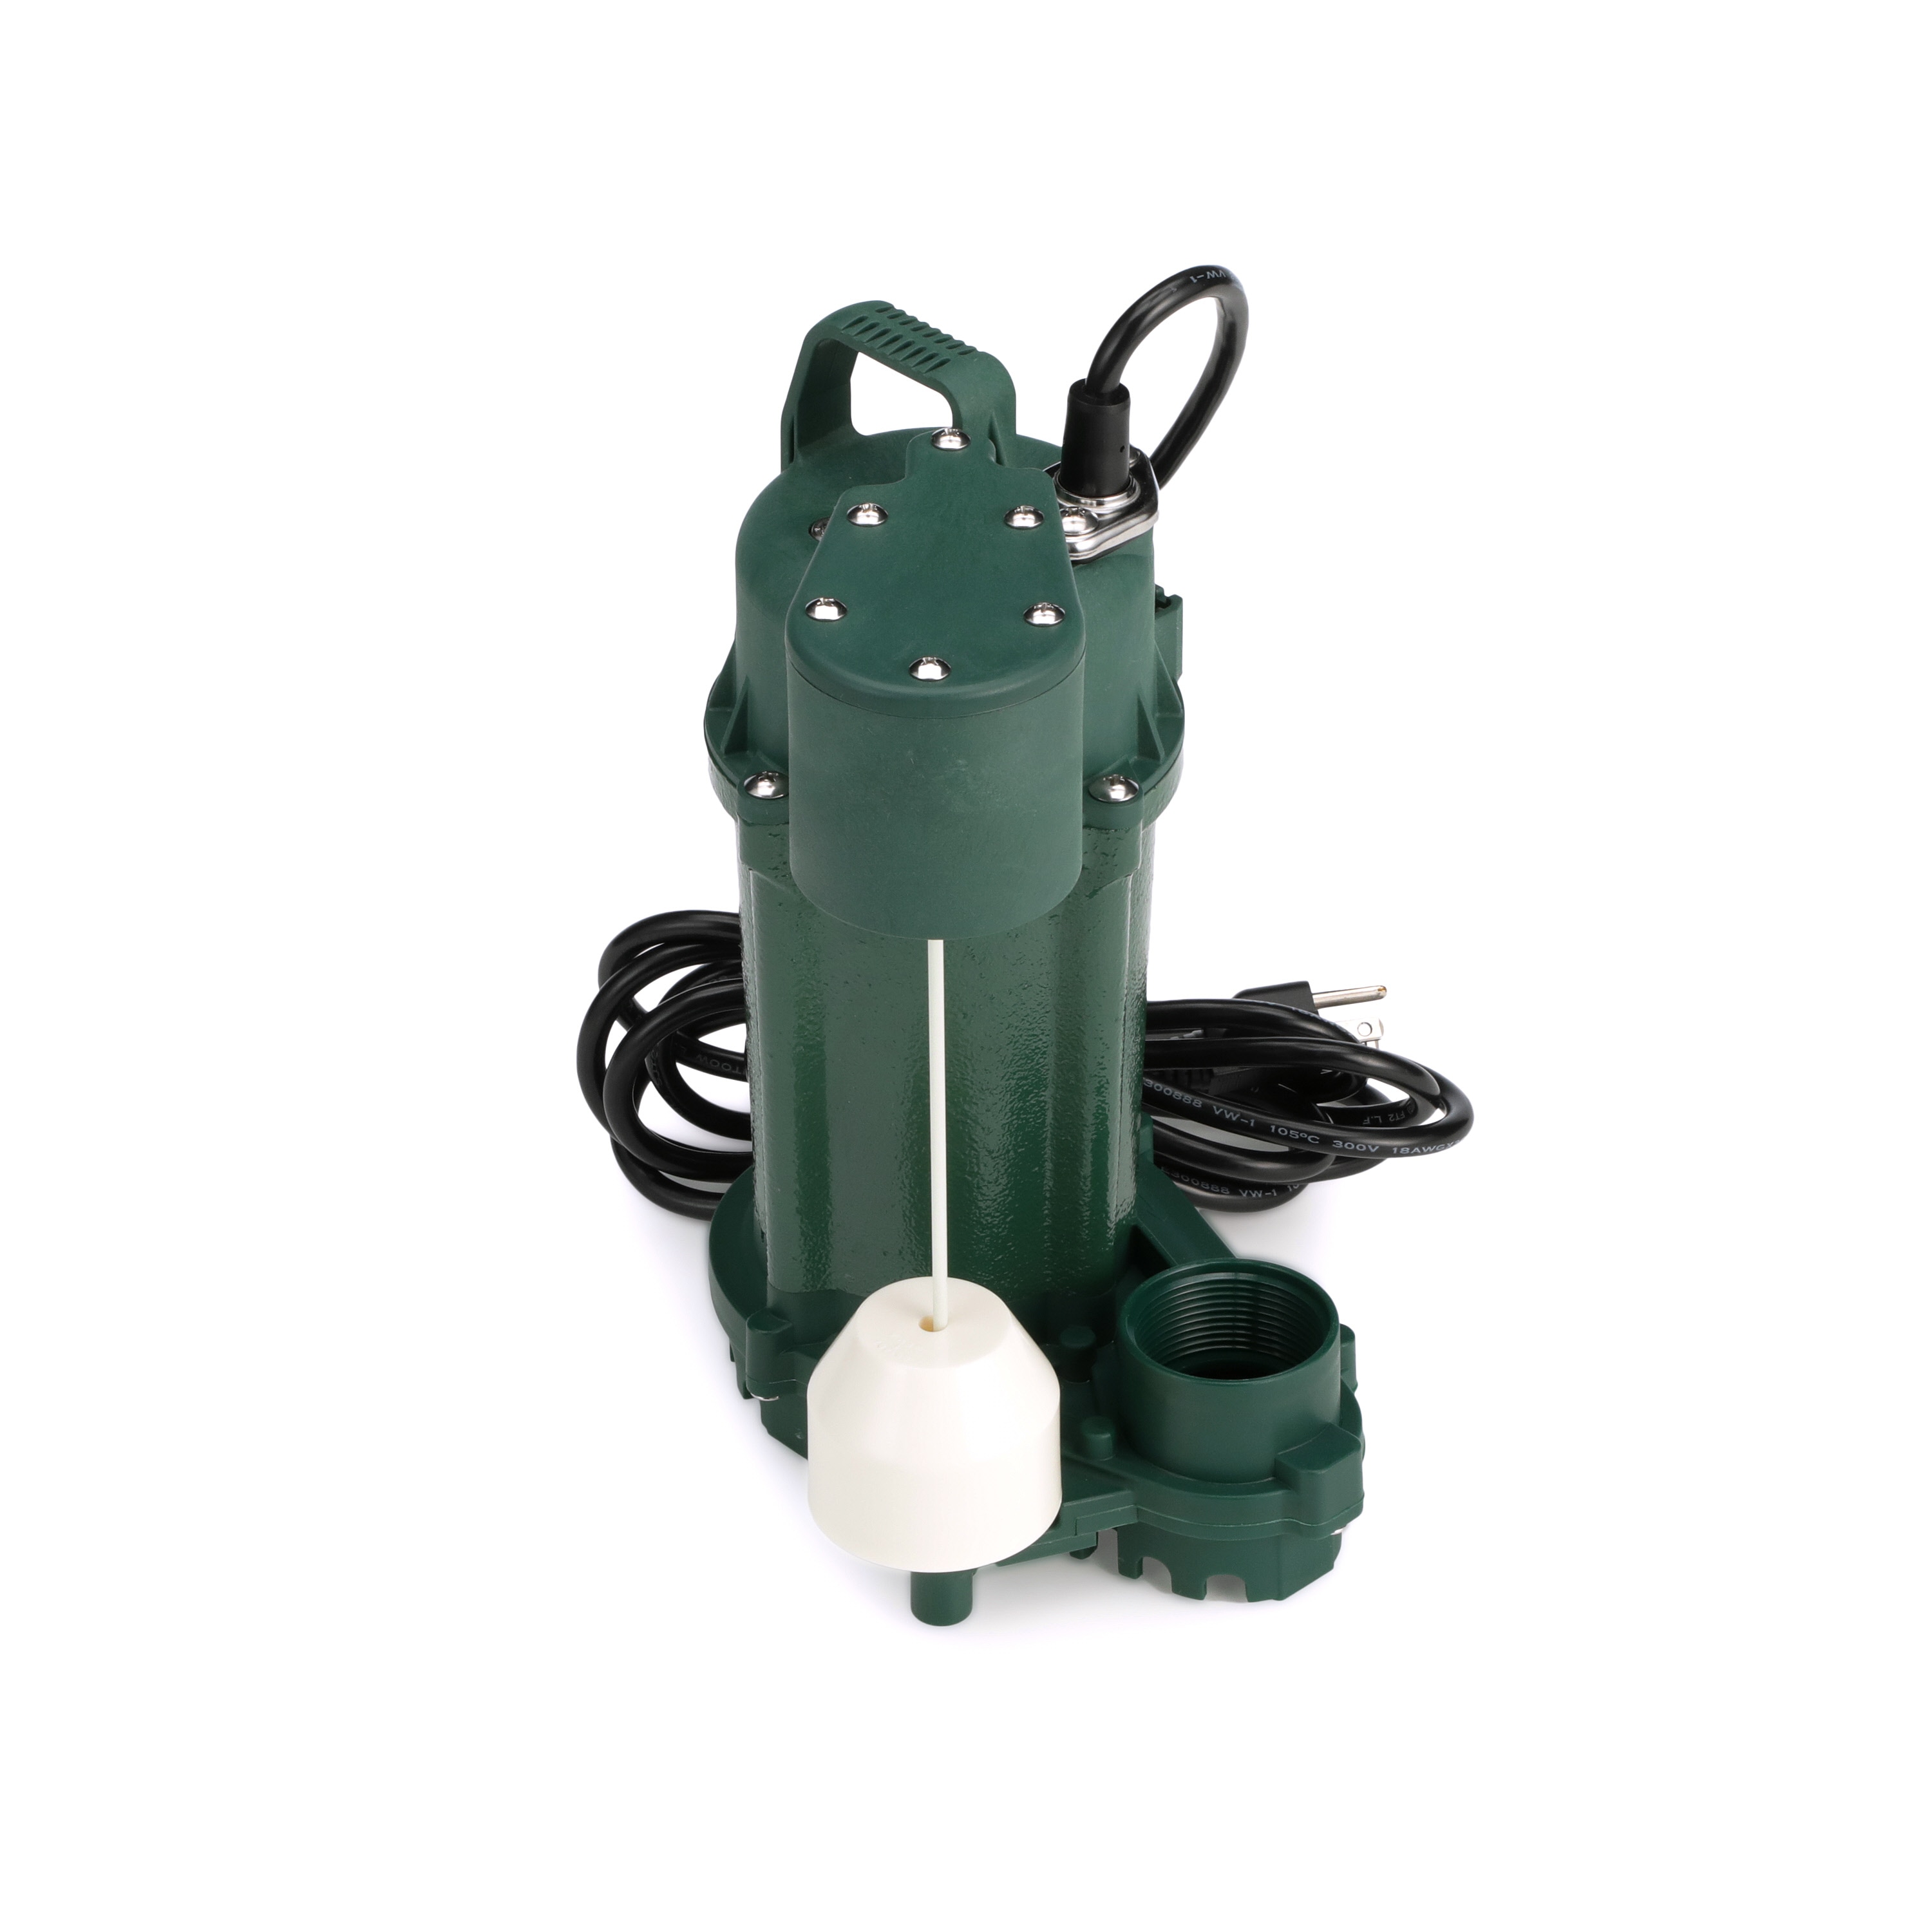 Zoeller 115v 1/3 HP 88gpm Submersible Cast-iron Sewage Pump 1261-0001 for sale online 